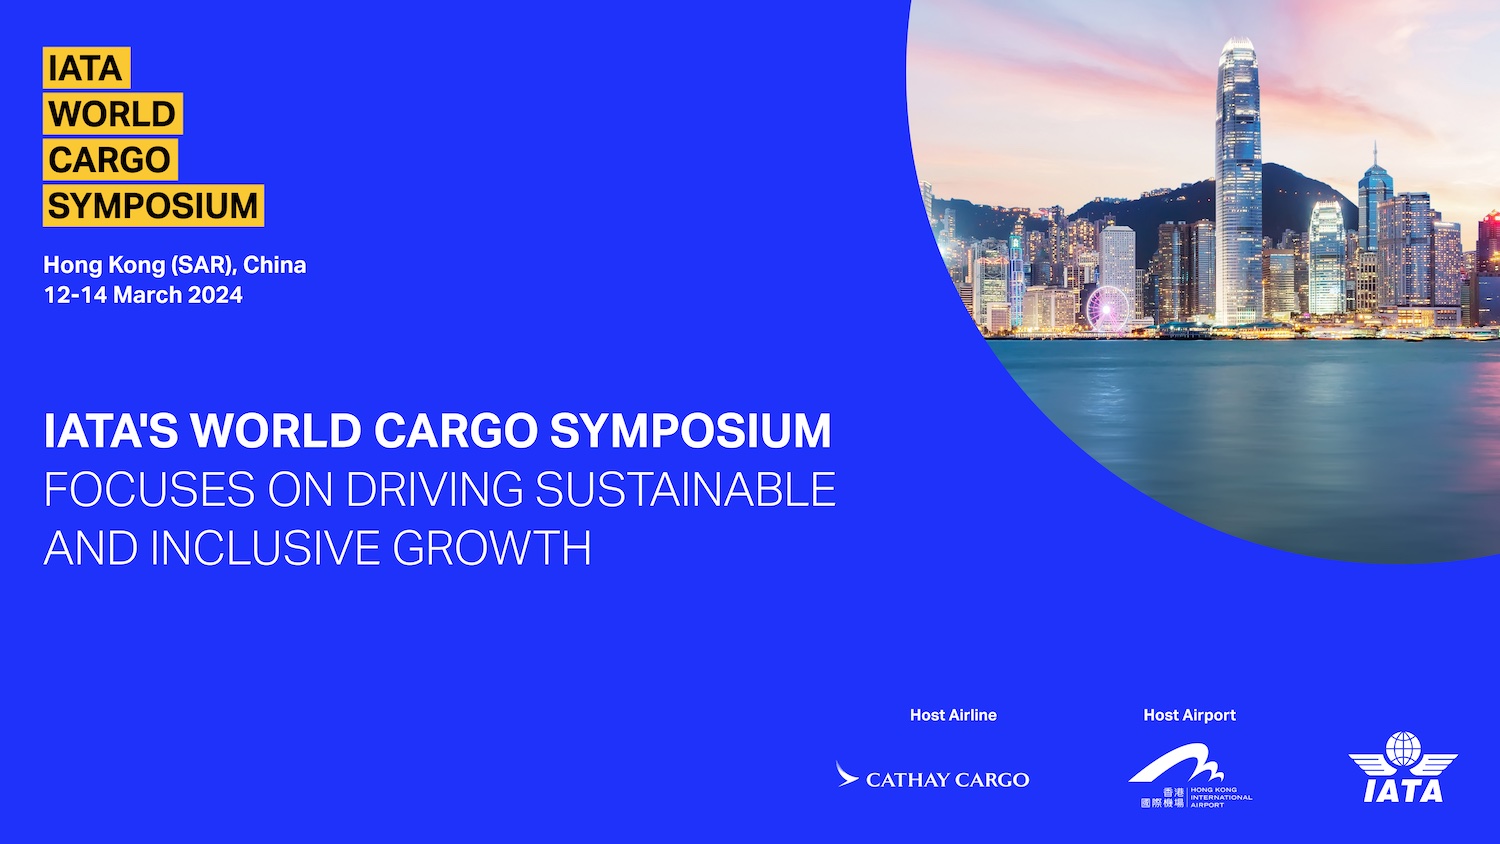 IATA's World Cargo Symposium Focuses on Driving Sustainable and